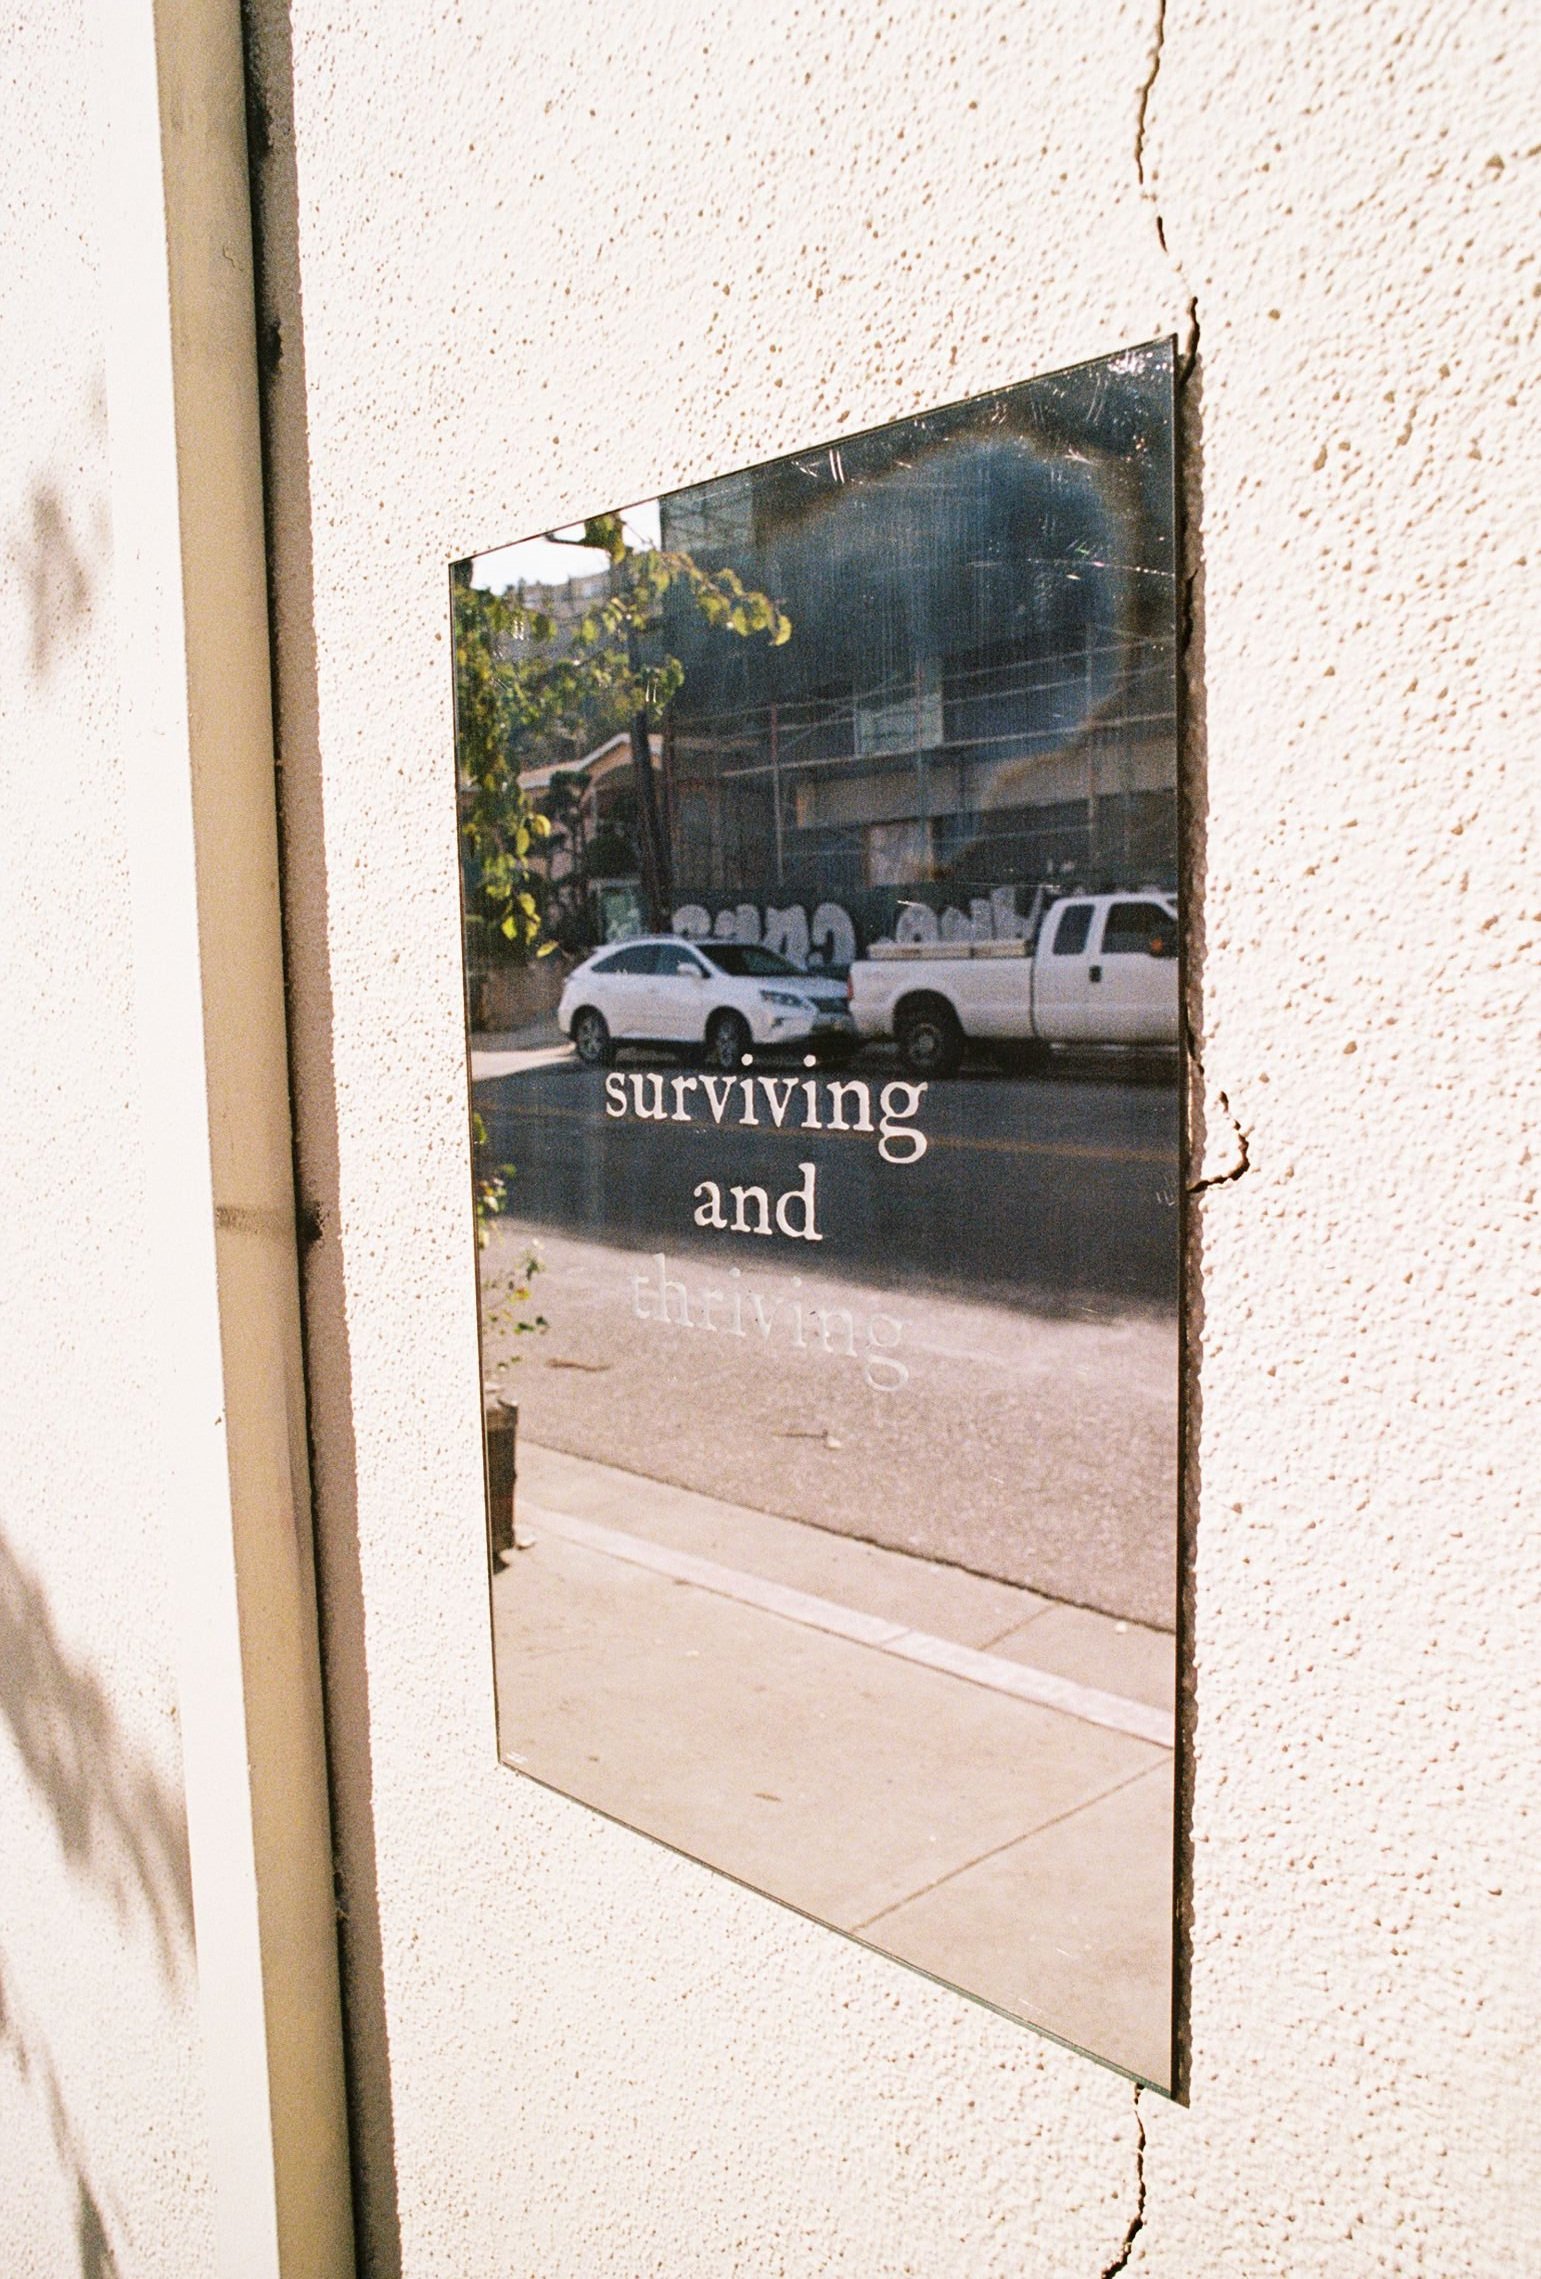 "surviving and thriving", Hyperion Ave (Silverlake)